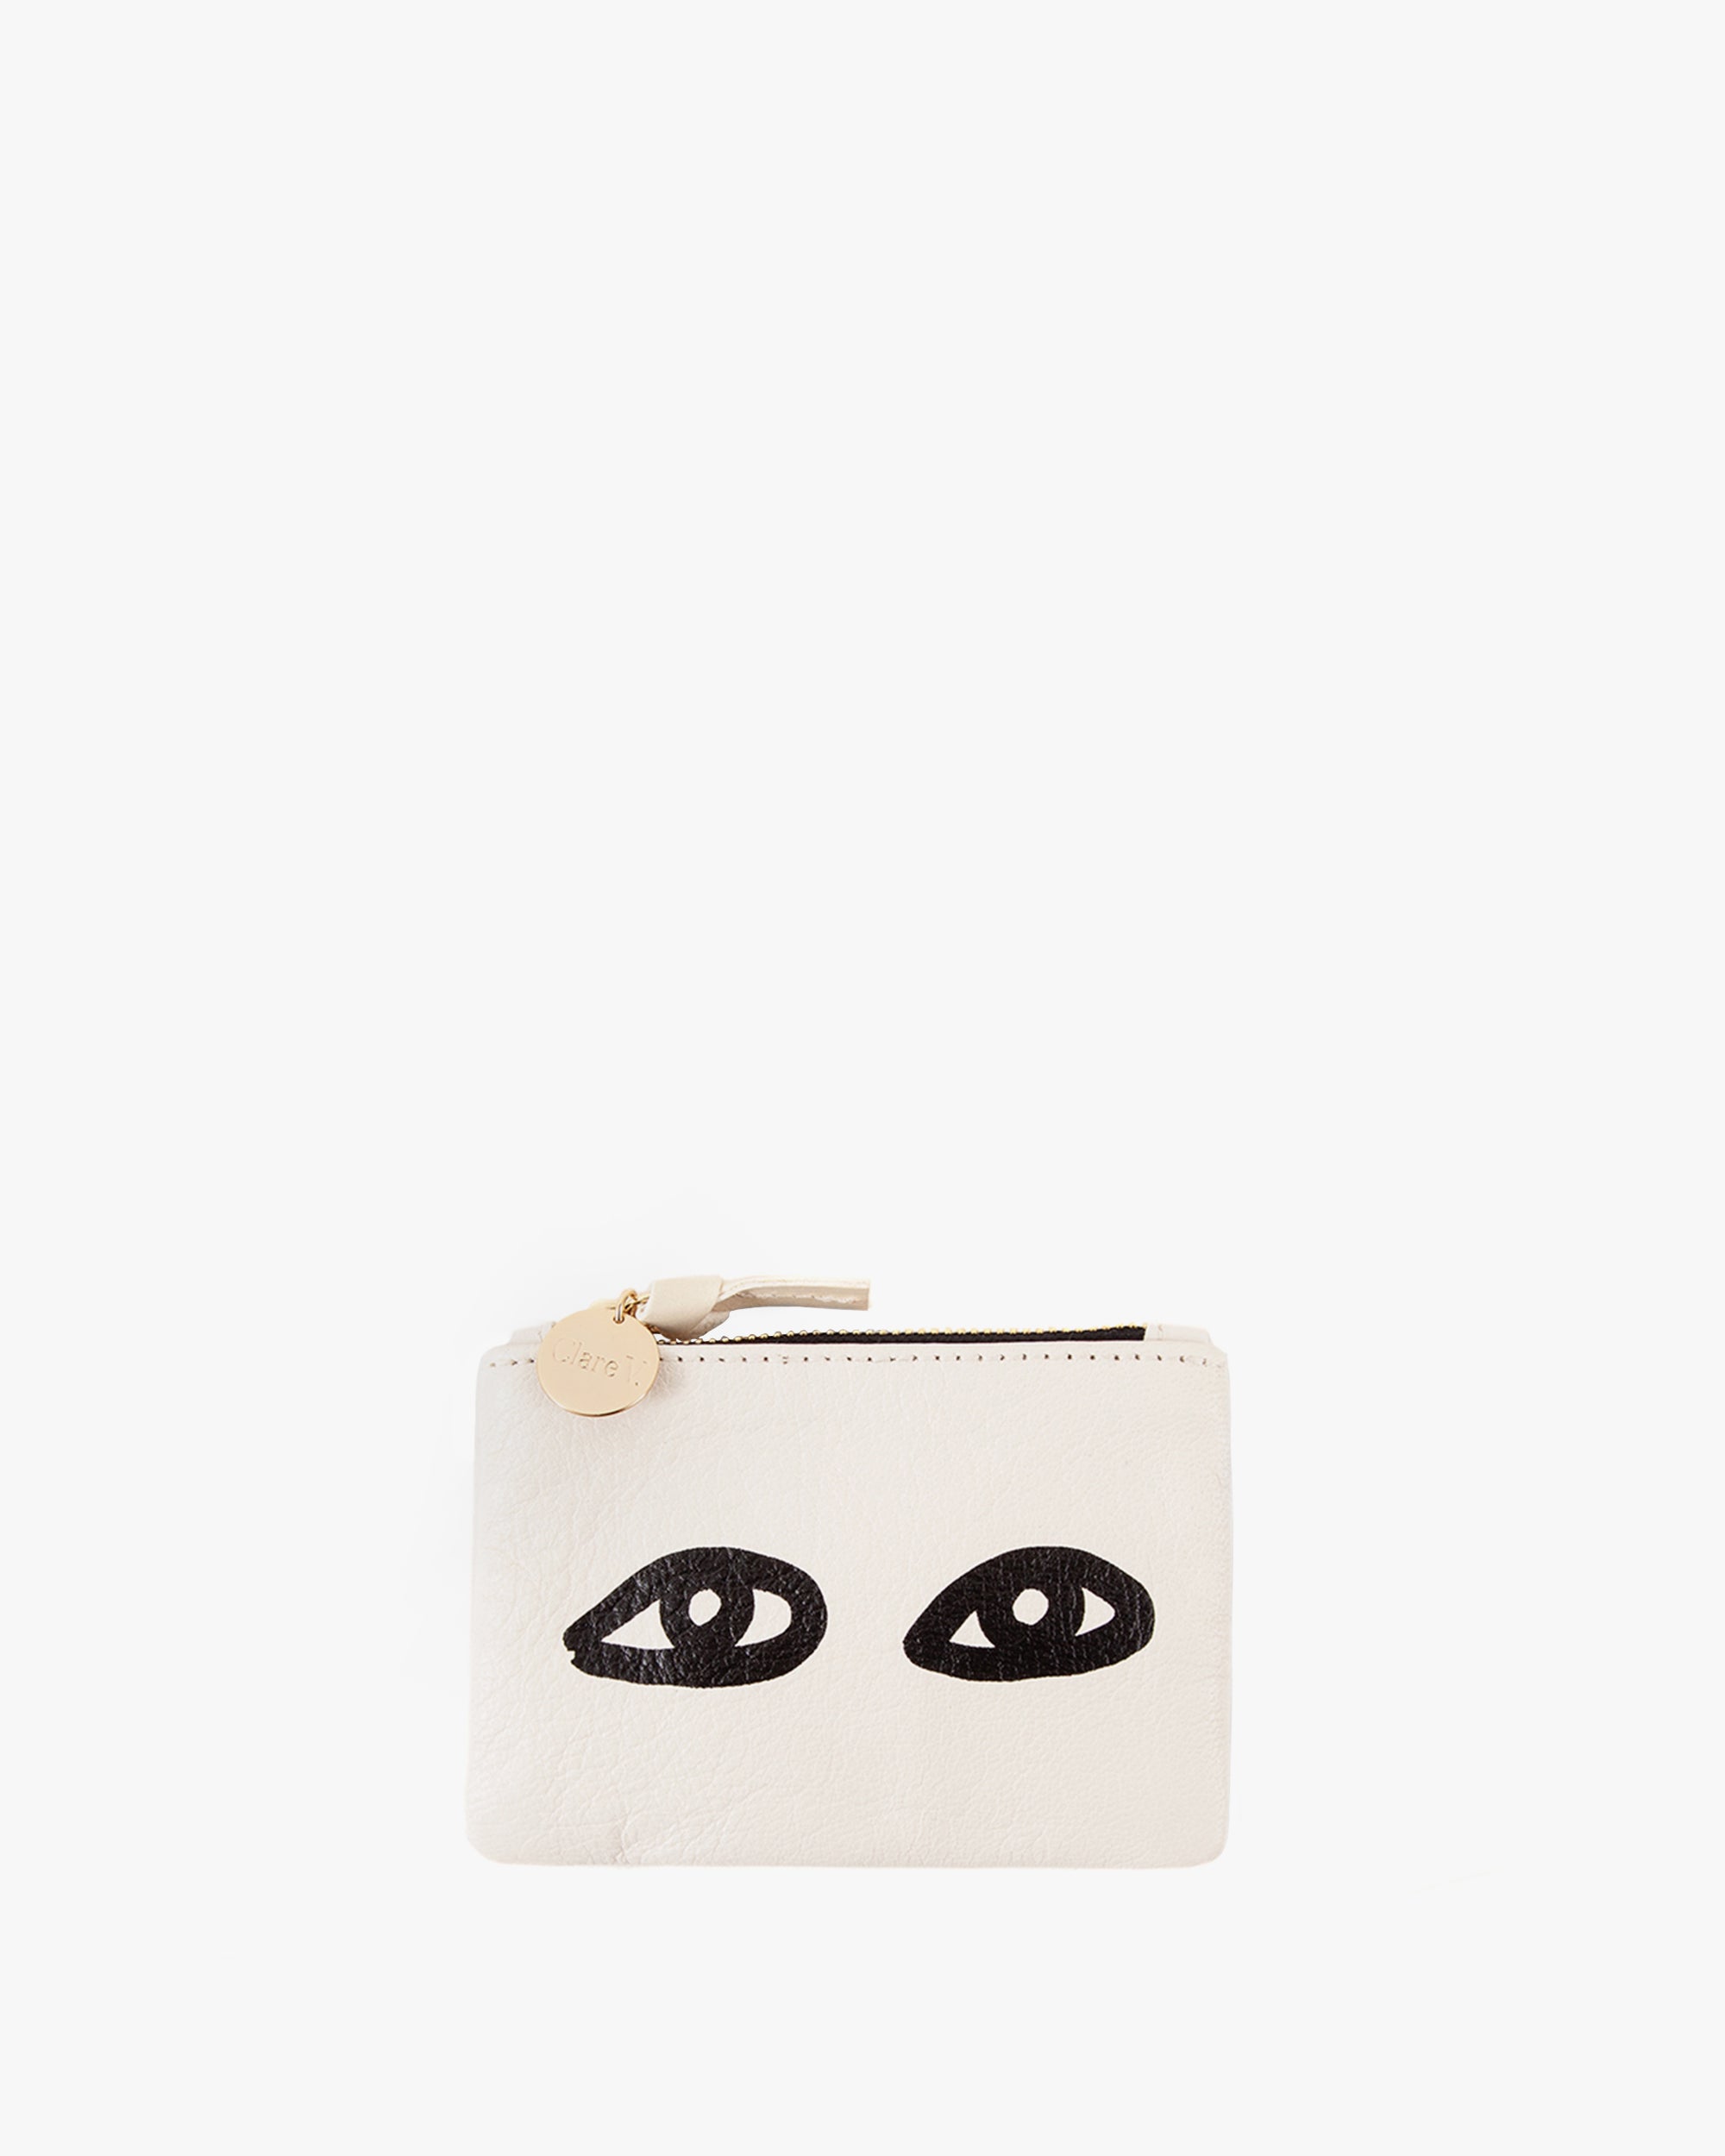 Clare V. Coin Clutch Cream with Eyes